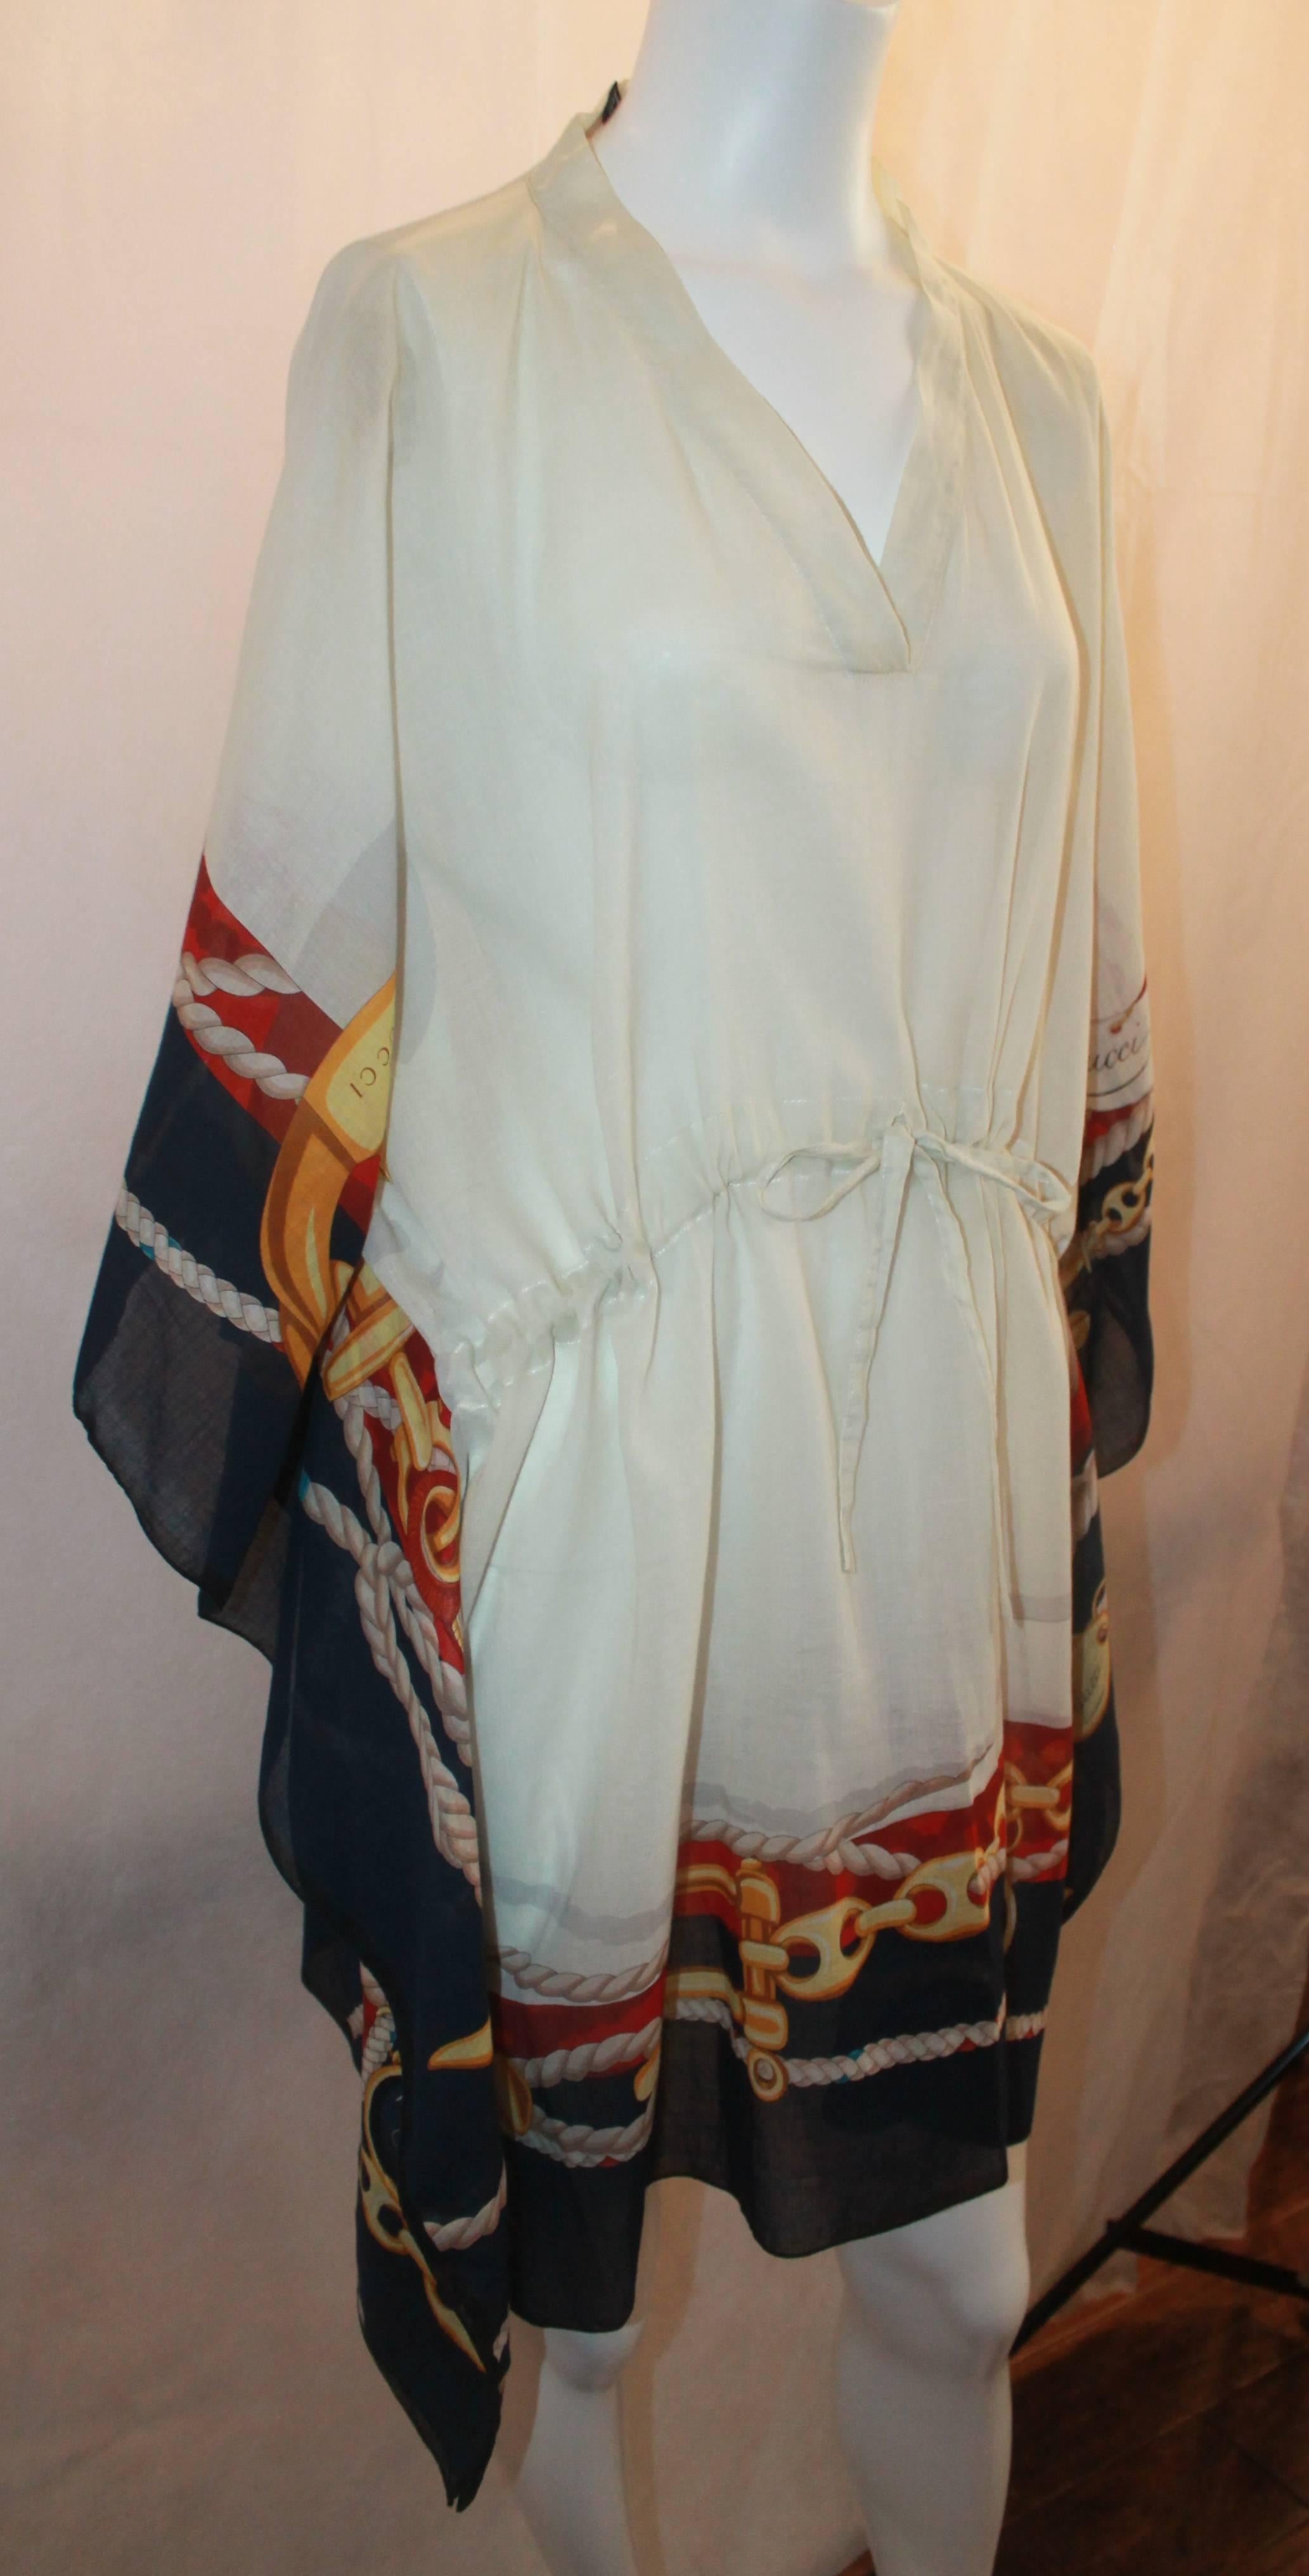 Gucci Ivory Cotton Caftan with Red & Navy Trim and Chain Detail - M. This piece is in excellent condition and is a must-have for summer! Perfect for a beach day or pool-side relaxing. The sheer fabric has a chain-like print on the edges with a rope